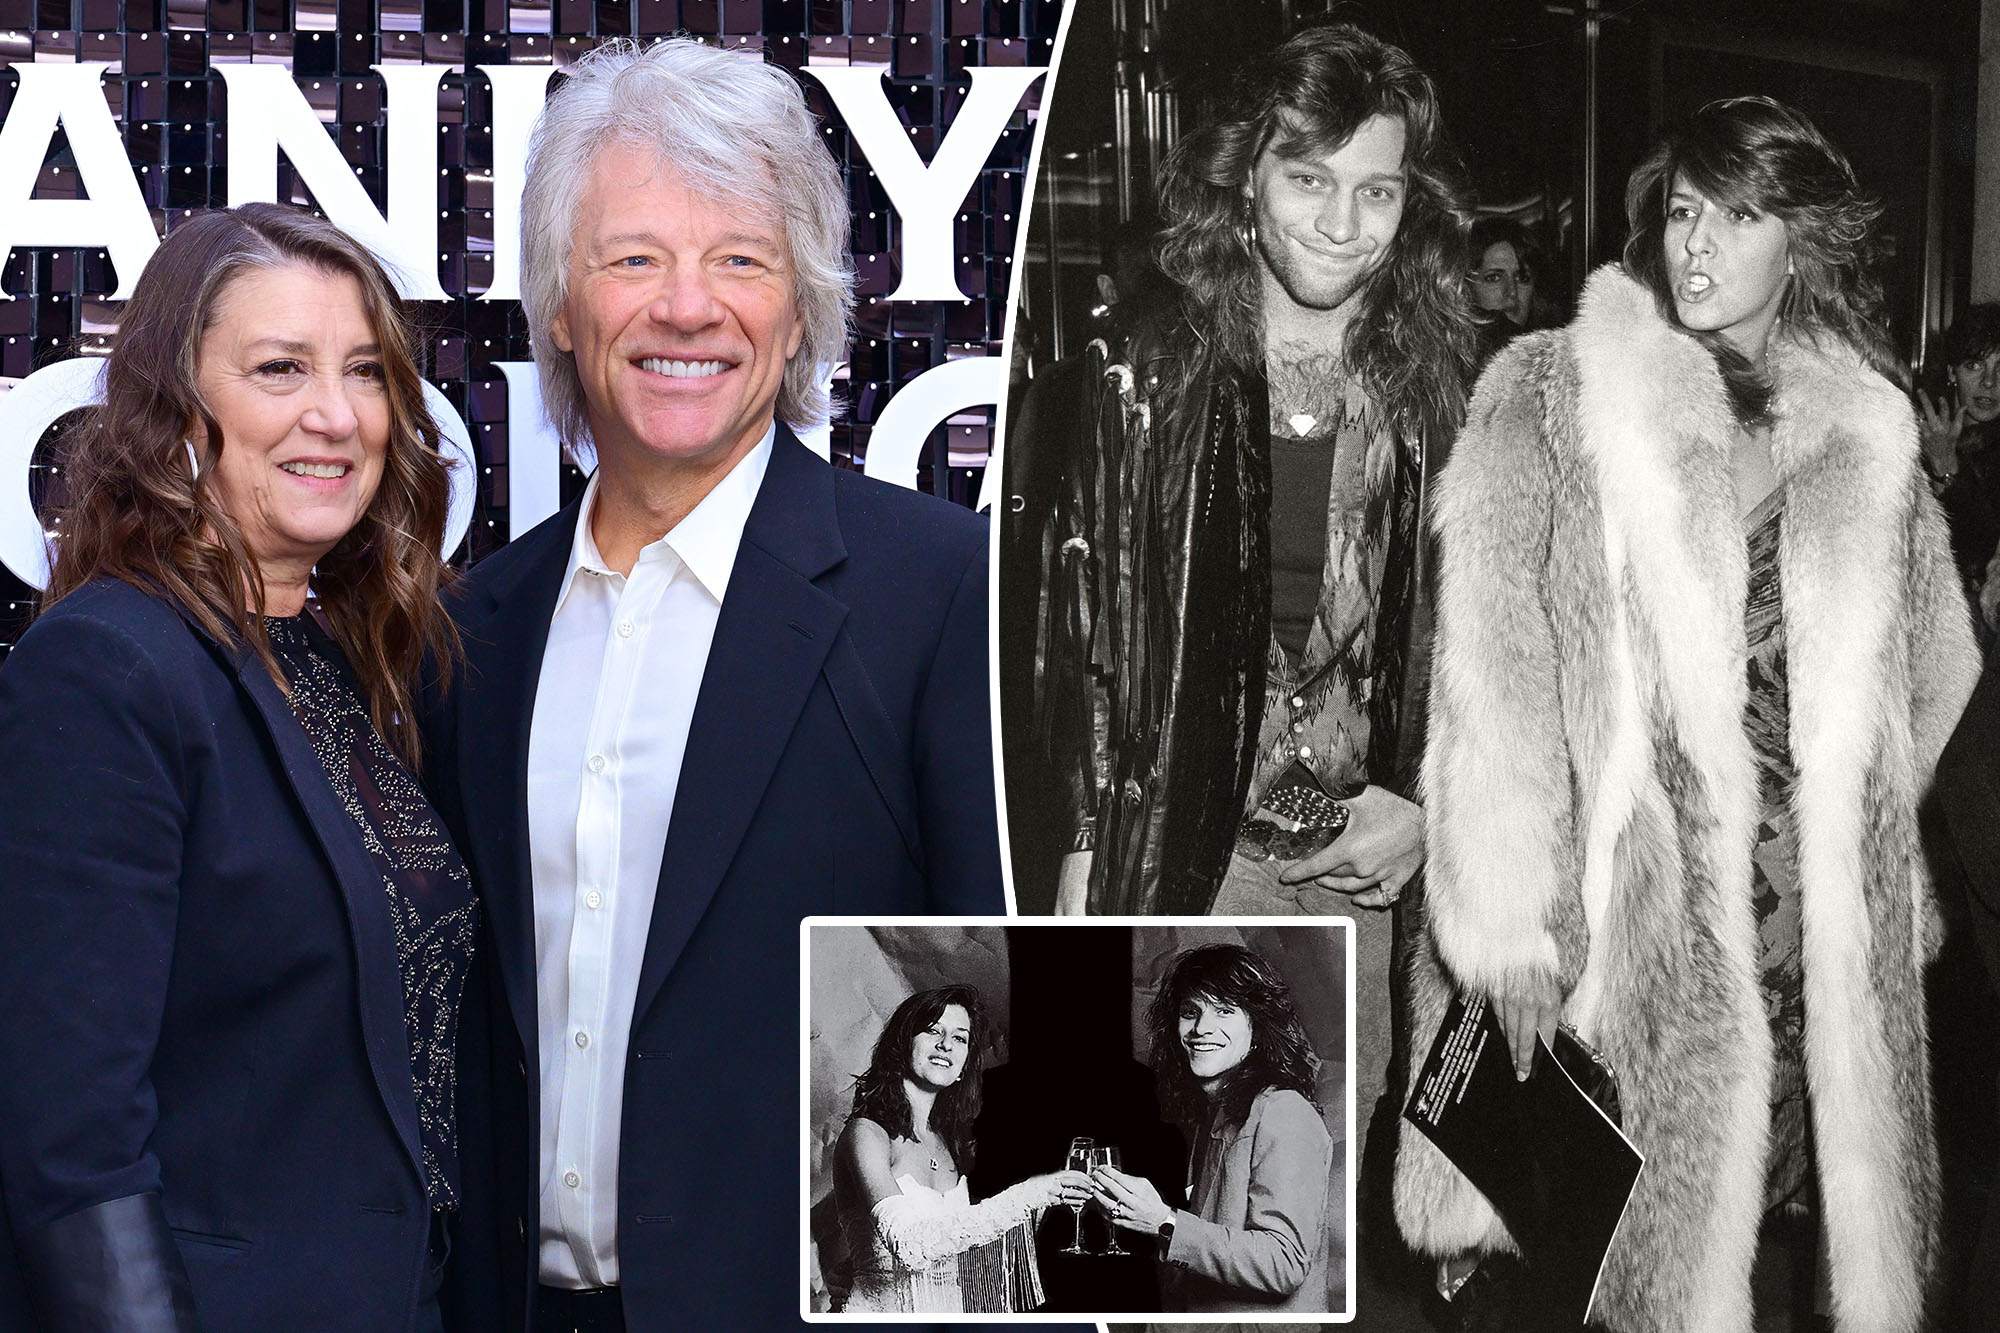 Singer and songwriter Jon Bon Jovi recalls making the last minute decision to married his-then fiancée while he was on tour at the time.